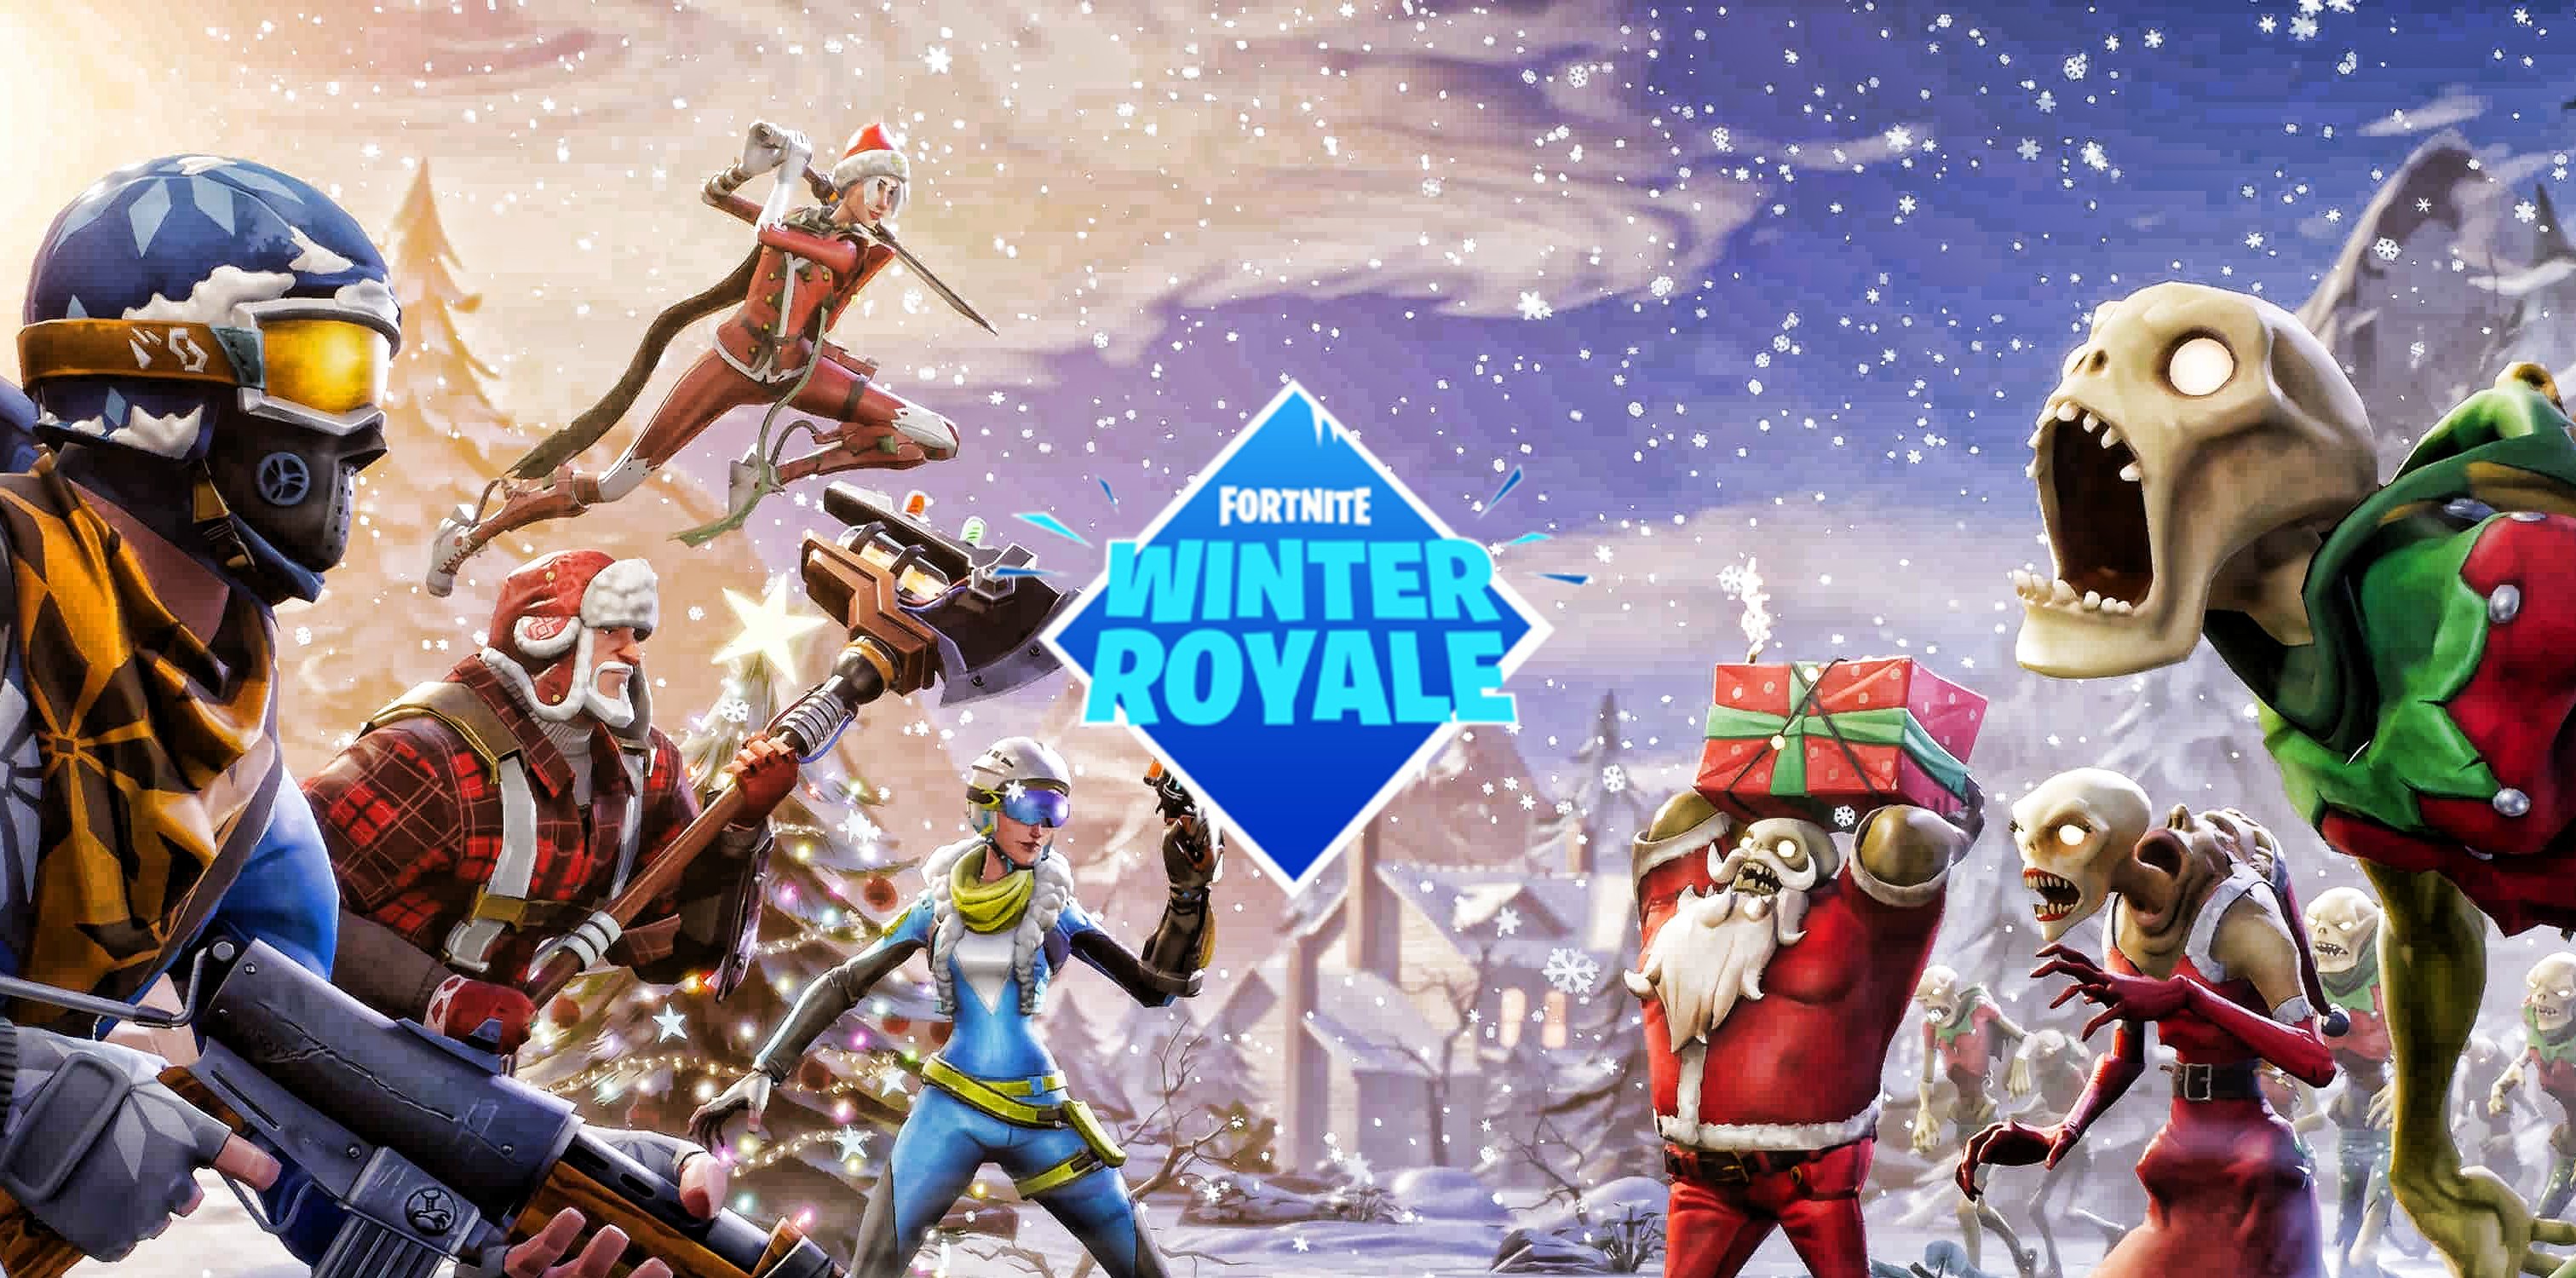 Who Qualified for the Fortnite Winter Royale? Current Standings